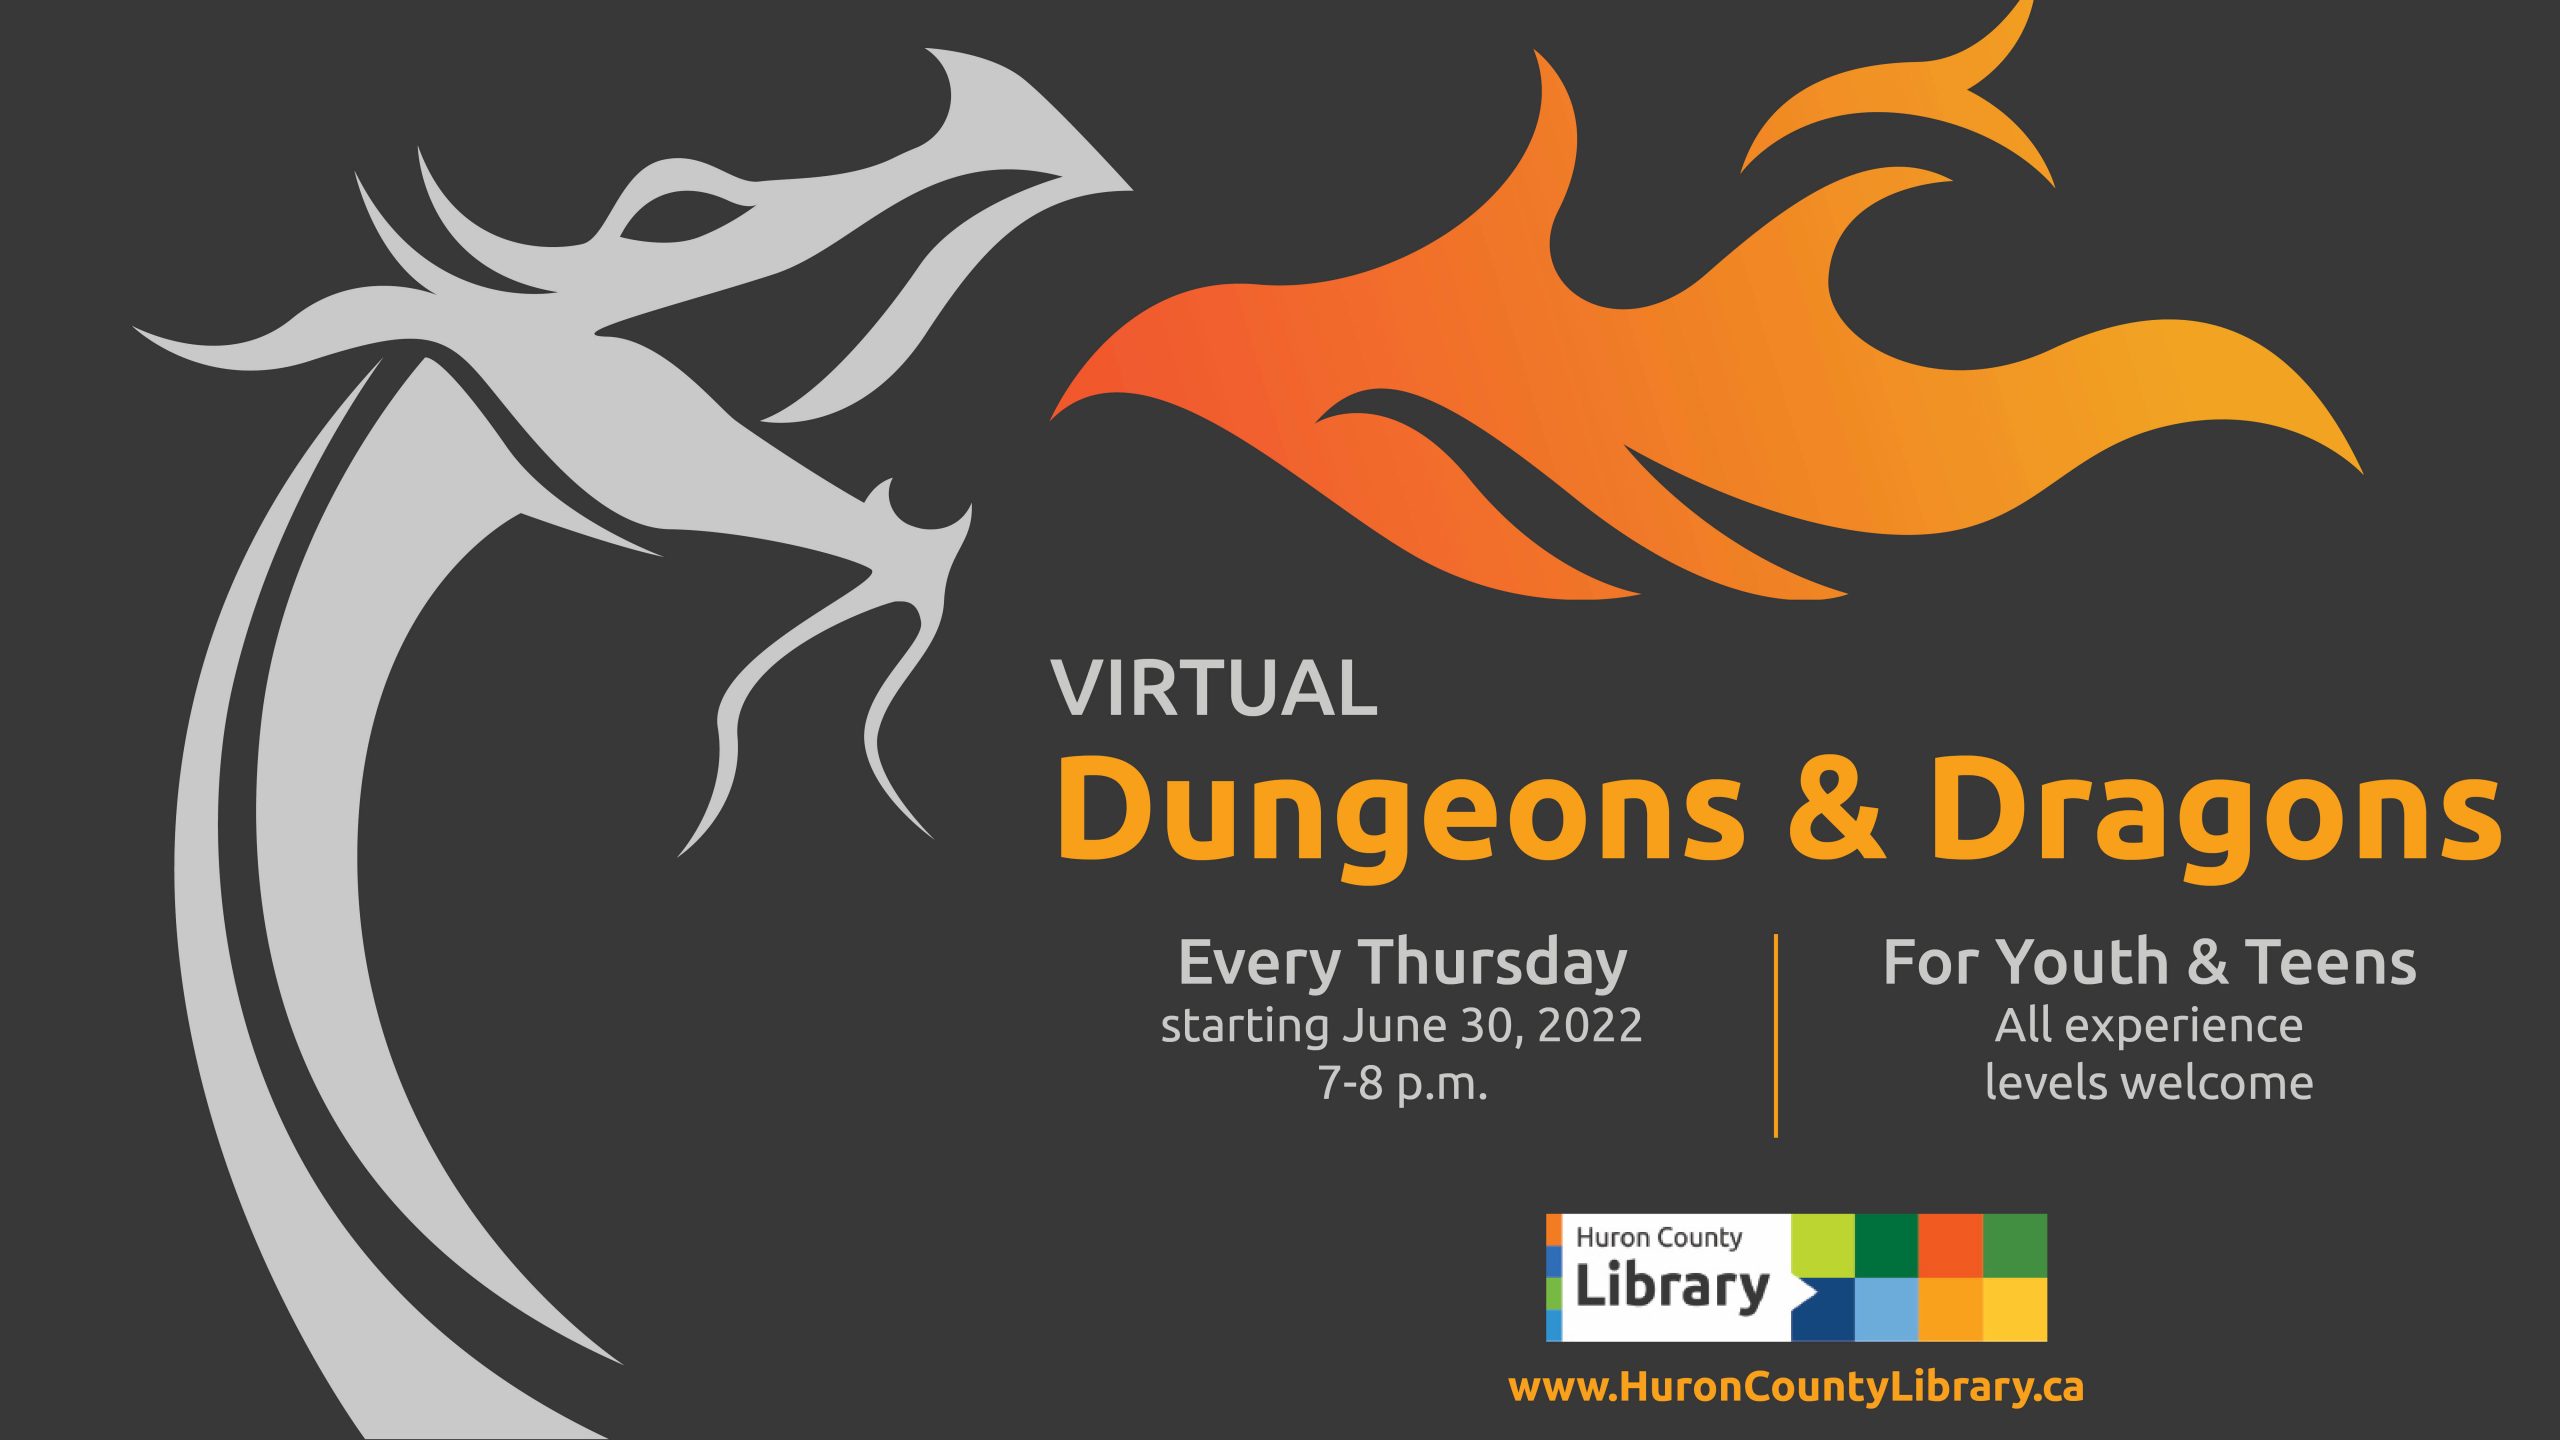 Illustration of a fire-breathing dragon with text promoting virtual Dungeons and Dragons